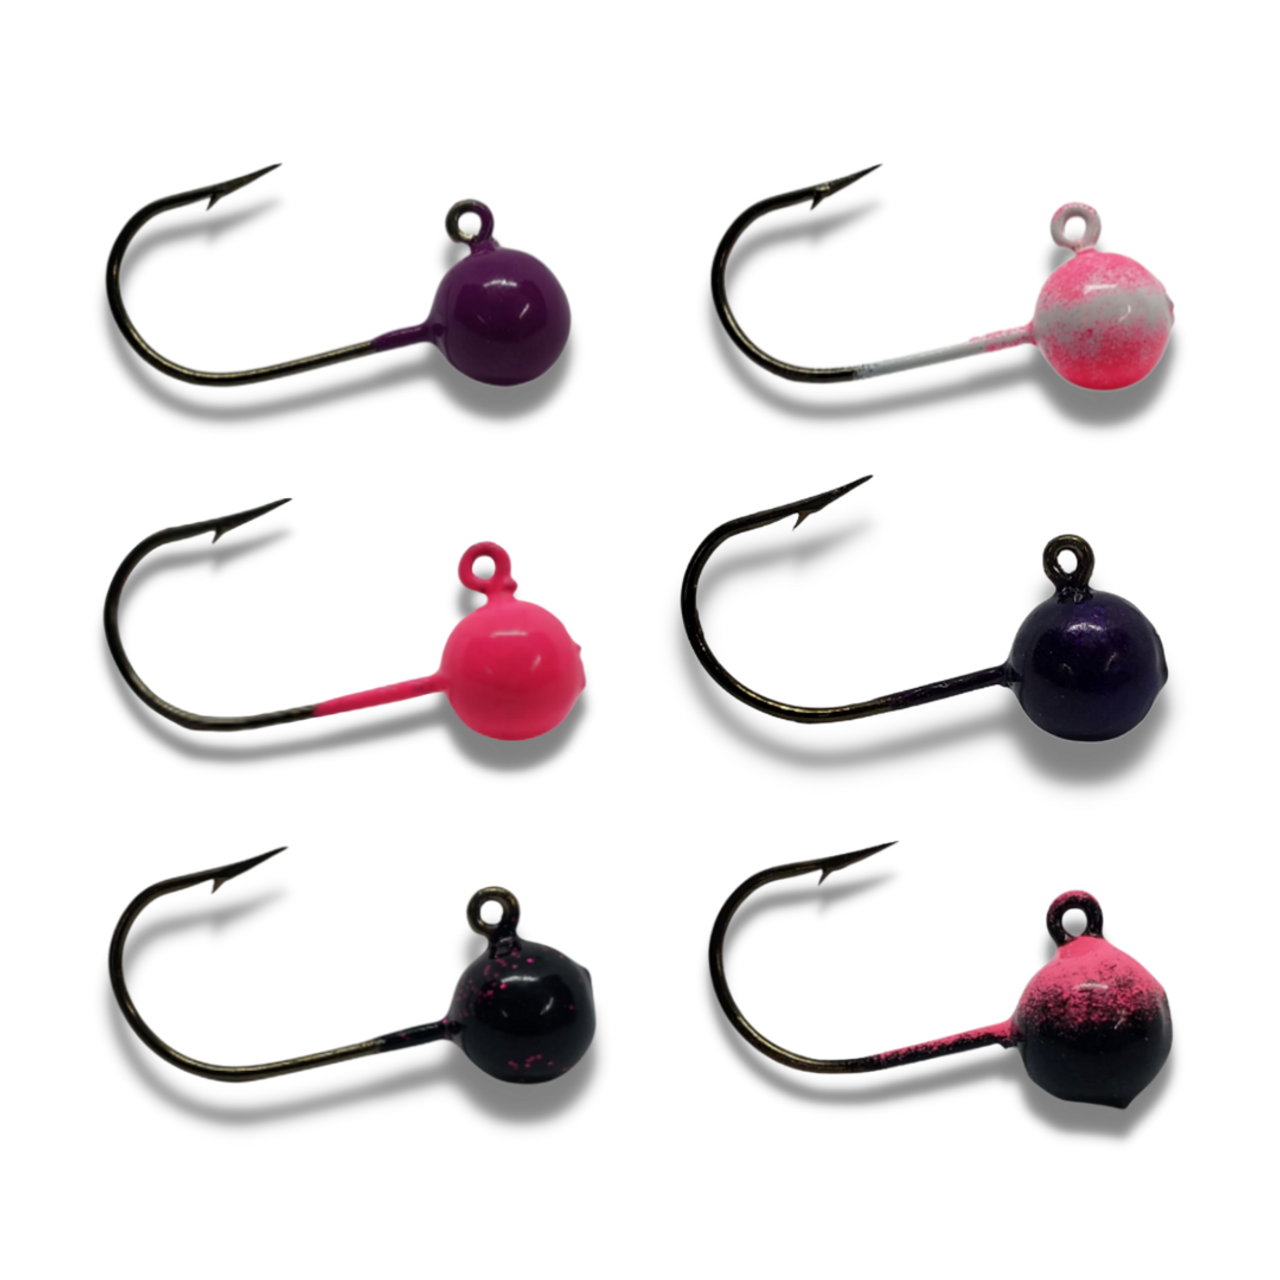 Short Shank 1/8 Ball Jigs
These short shank ball jigs are the perfect combination for those finicky walleye who are light biting. The small presentation paired with a minnow or leech assists with those bites when walleye are just sucking it in. Short shank jigs are also a favourite for using with live minnows. The added bonus of the short shank also means quicker hook set.